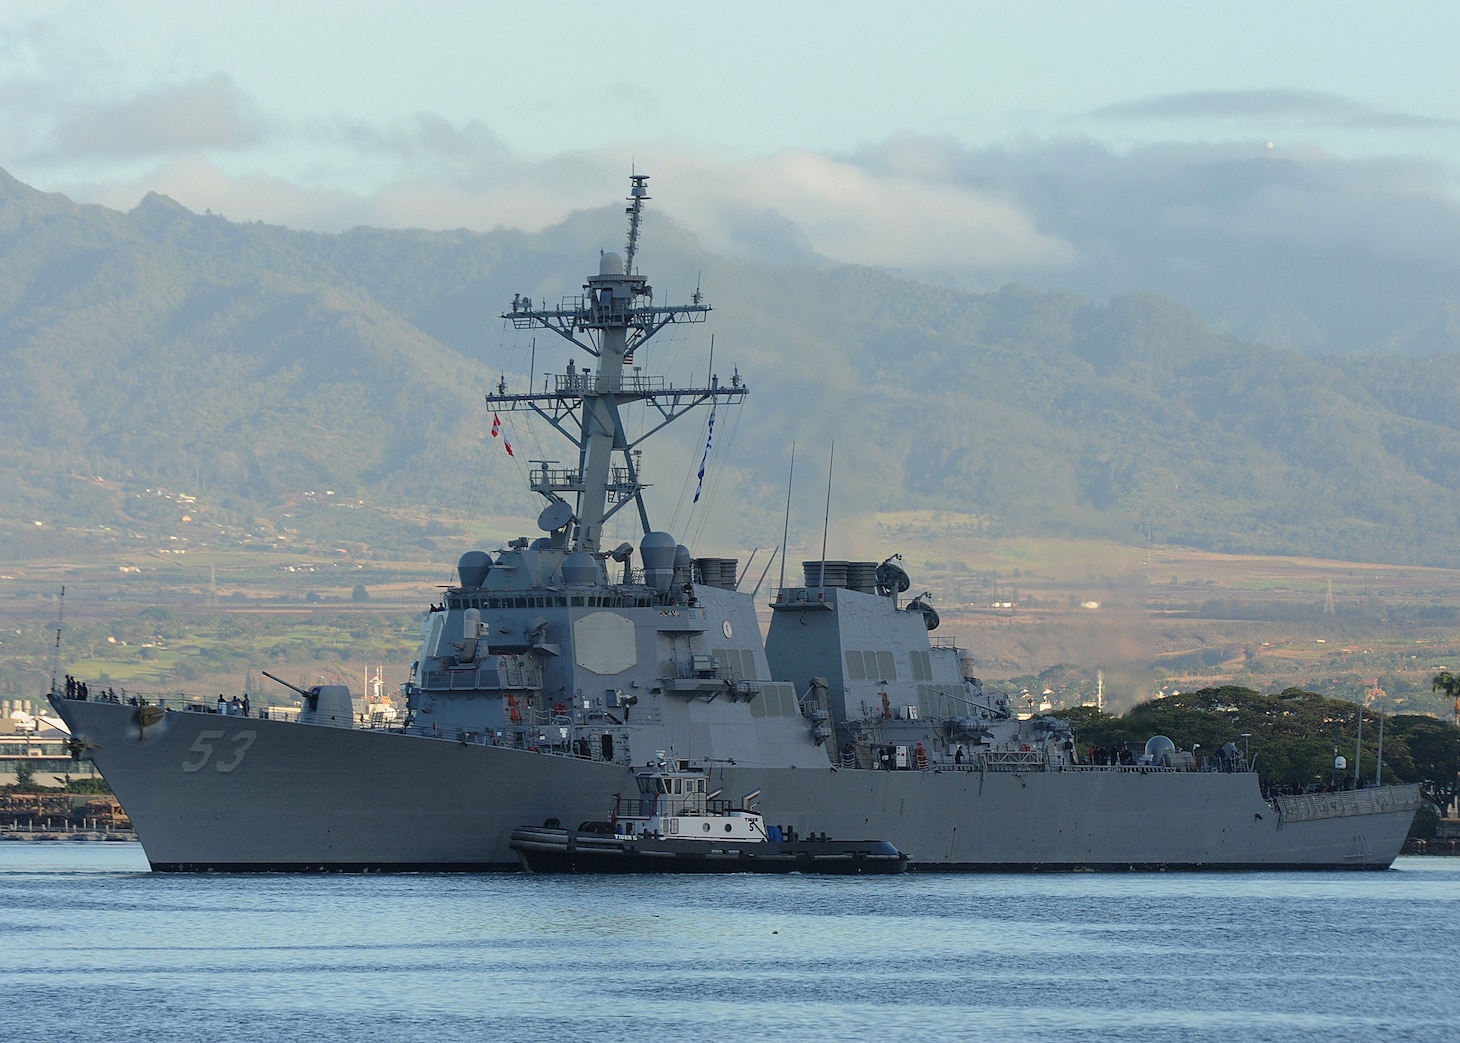 Official U.S. Navy file photo of the guided-missile destroyer USS John Paul Jones (DDG 53) departing Joint Base Pearl-Harbor-Hickam for a scheduled underway, July 27, 2015.
